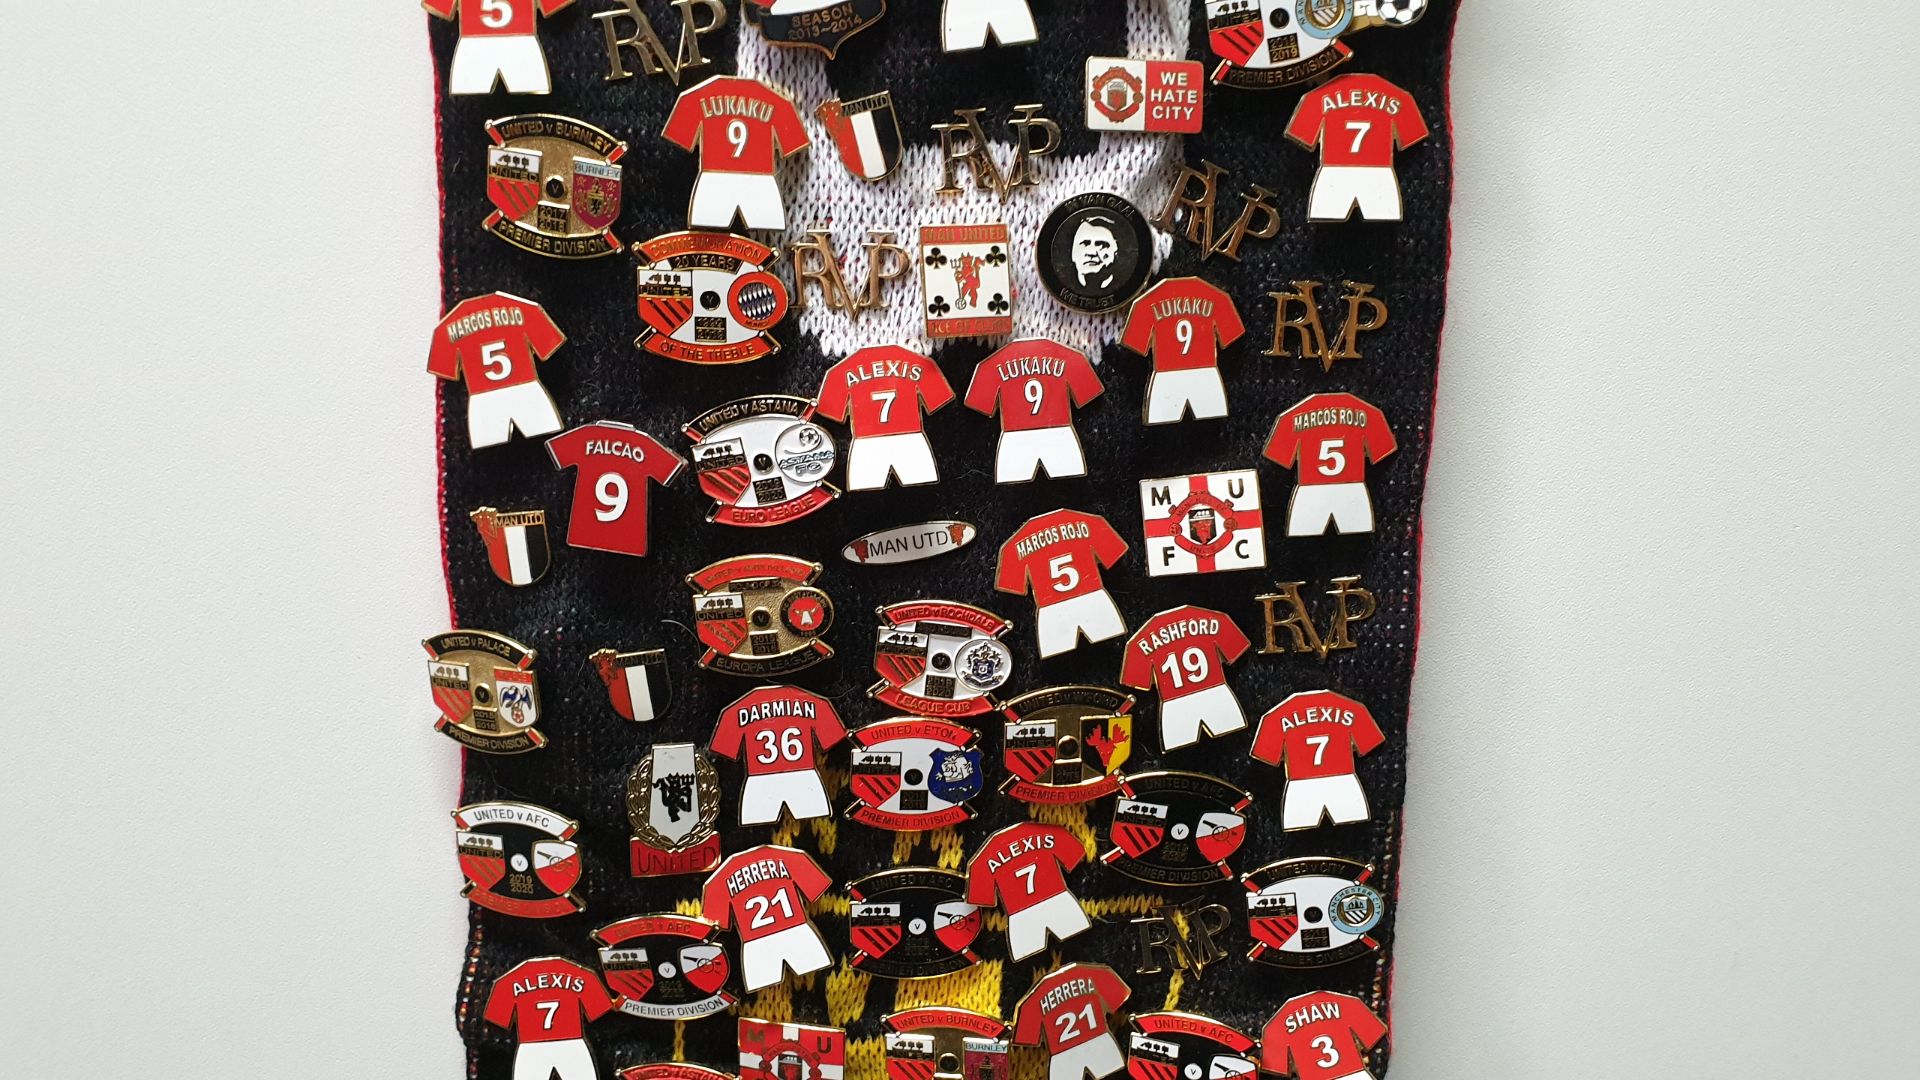 MANCHESTER UNITED SCARF CONTAINING APPROX 220 X PIN BADGES IE MUFC, OLD TRAFFORD, WE HATE CITY, EURO - Image 7 of 8